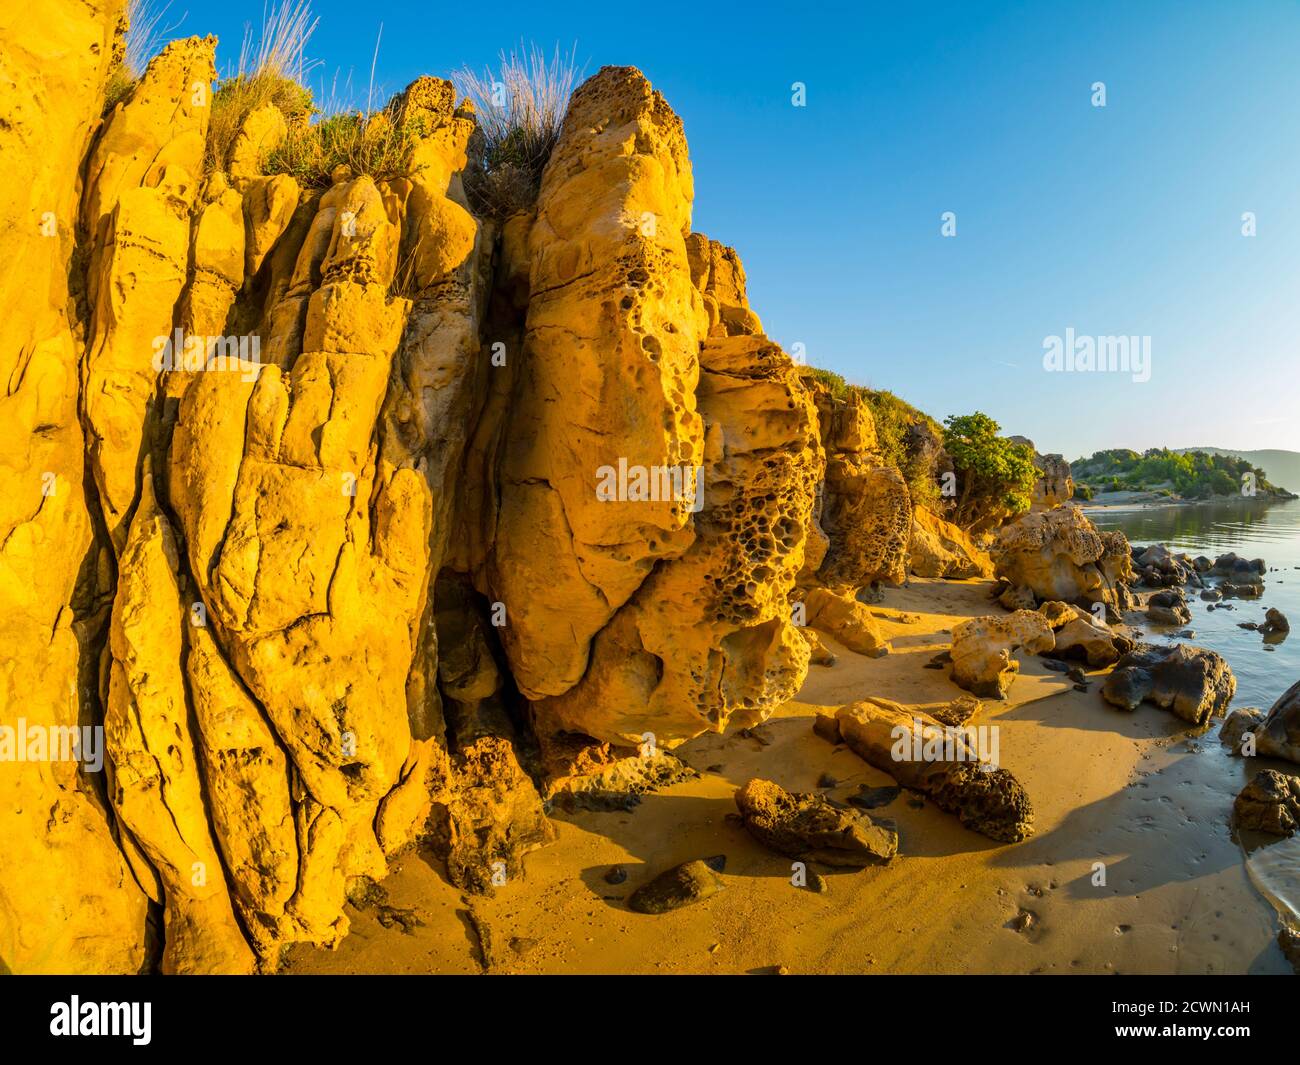 Very rough terrain of tertiary marl marls and sandstones of Lopar beach on Rab island Croatia Europe layers layered natural wall sandy sand like gold Stock Photo